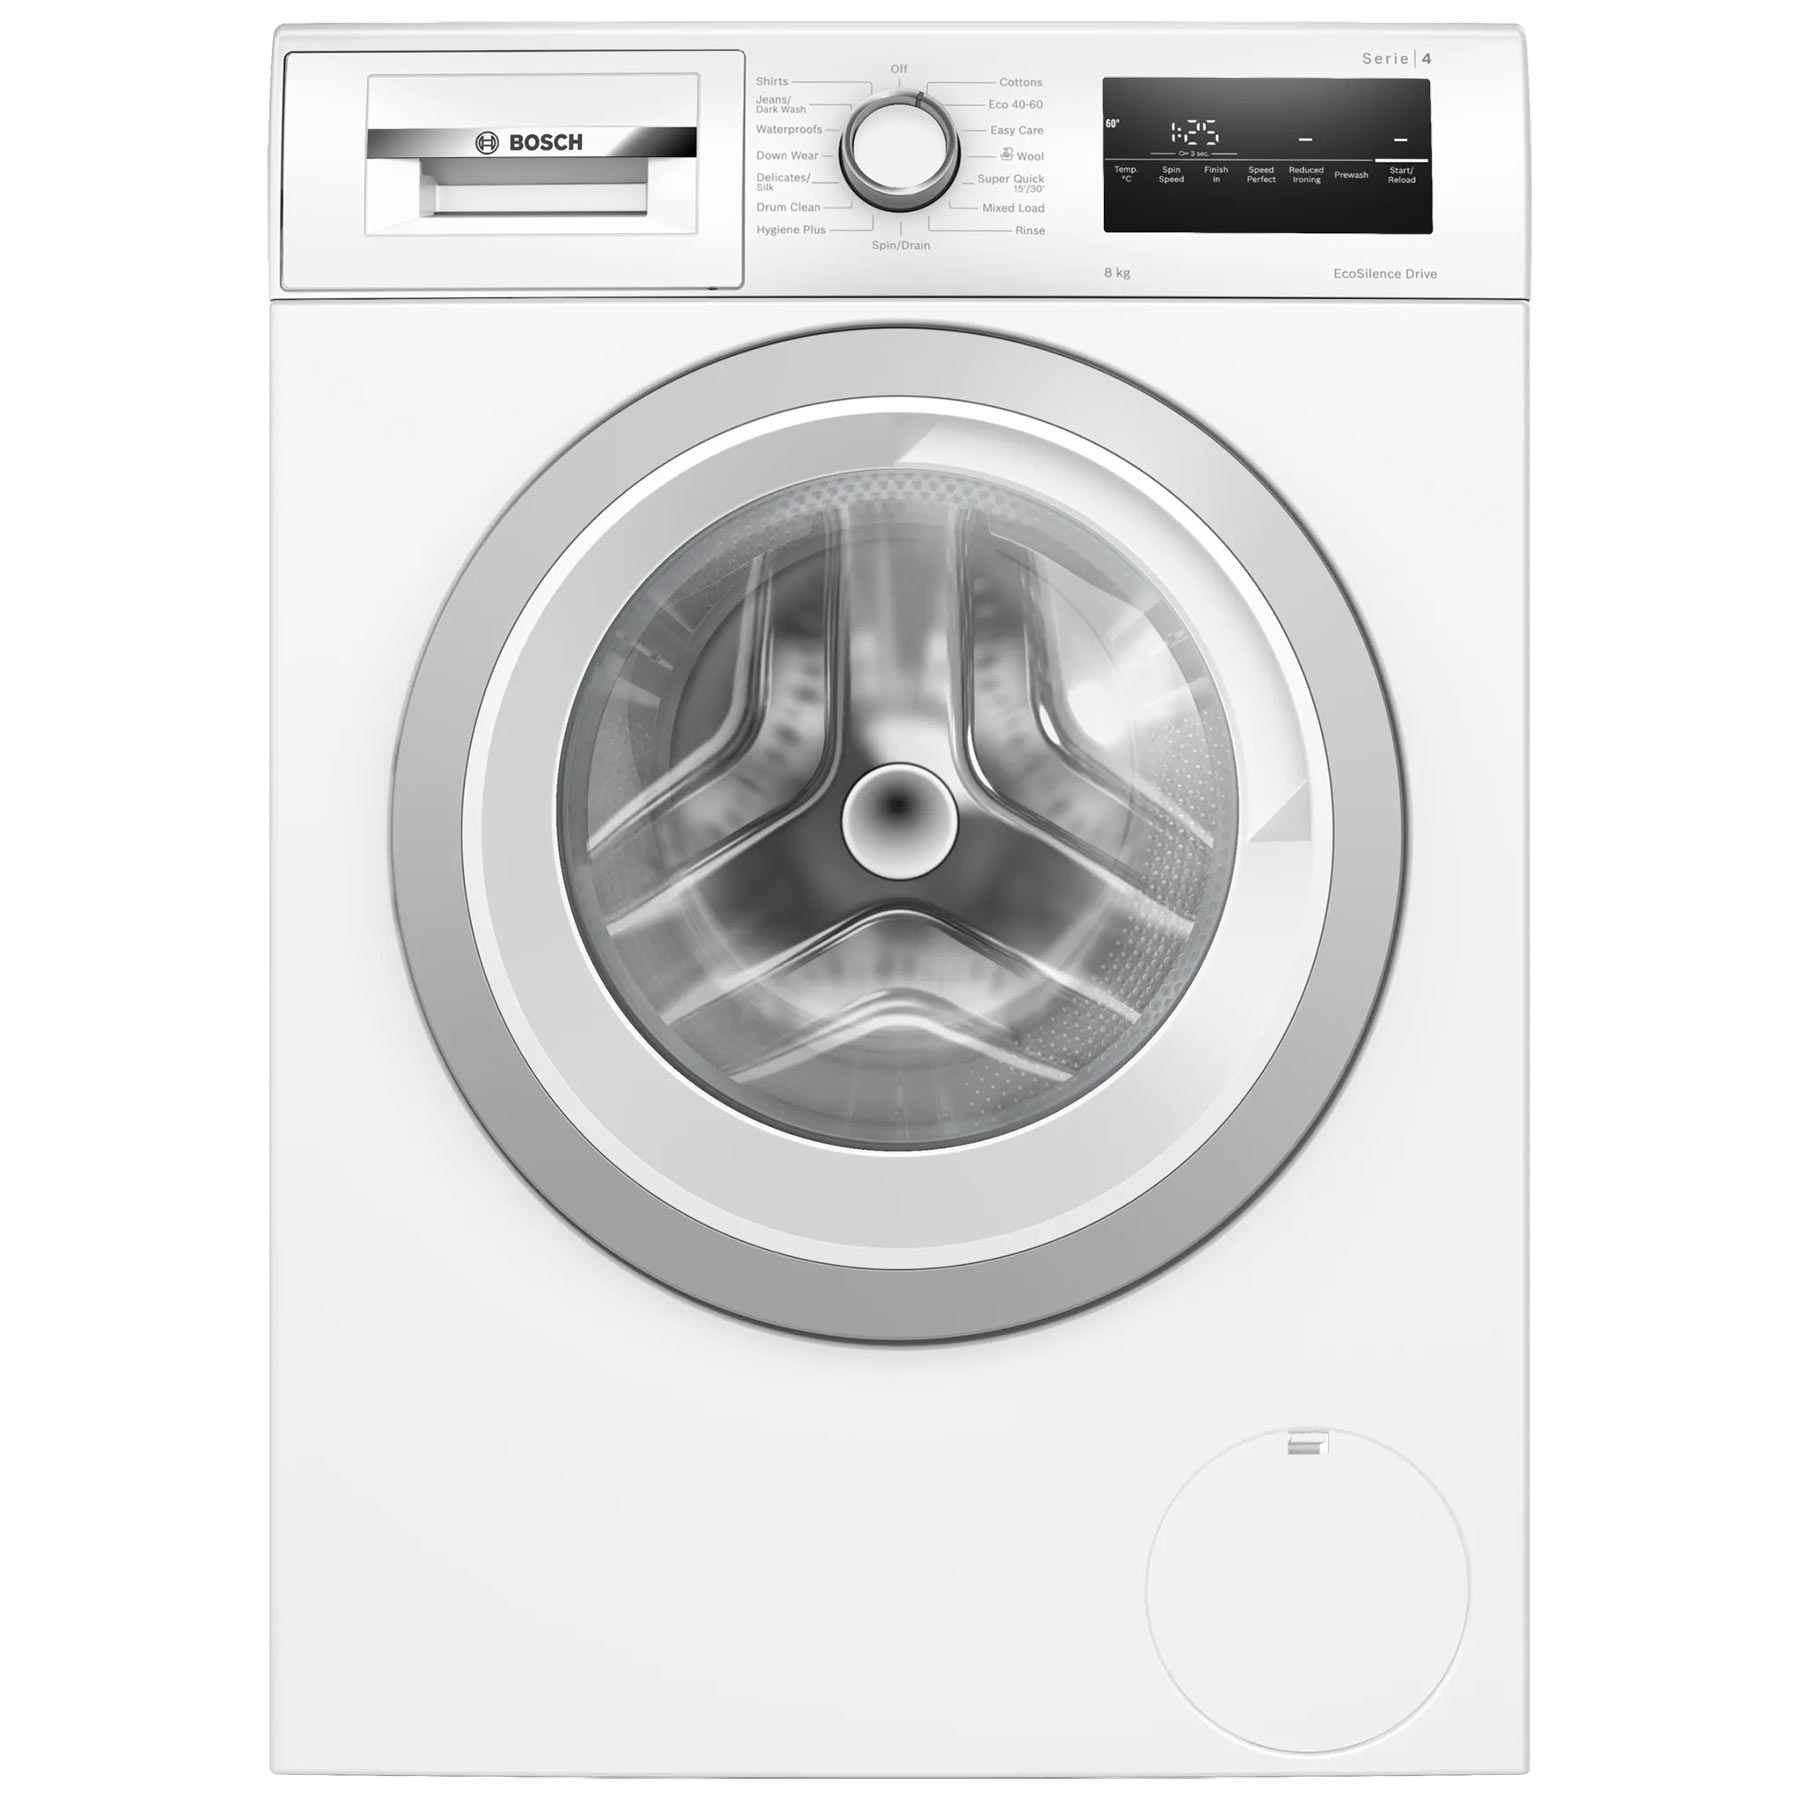 Image of Bosch WAN28250GB Series 4 Washing Machine in White 1400rpm 8Kg A Rated